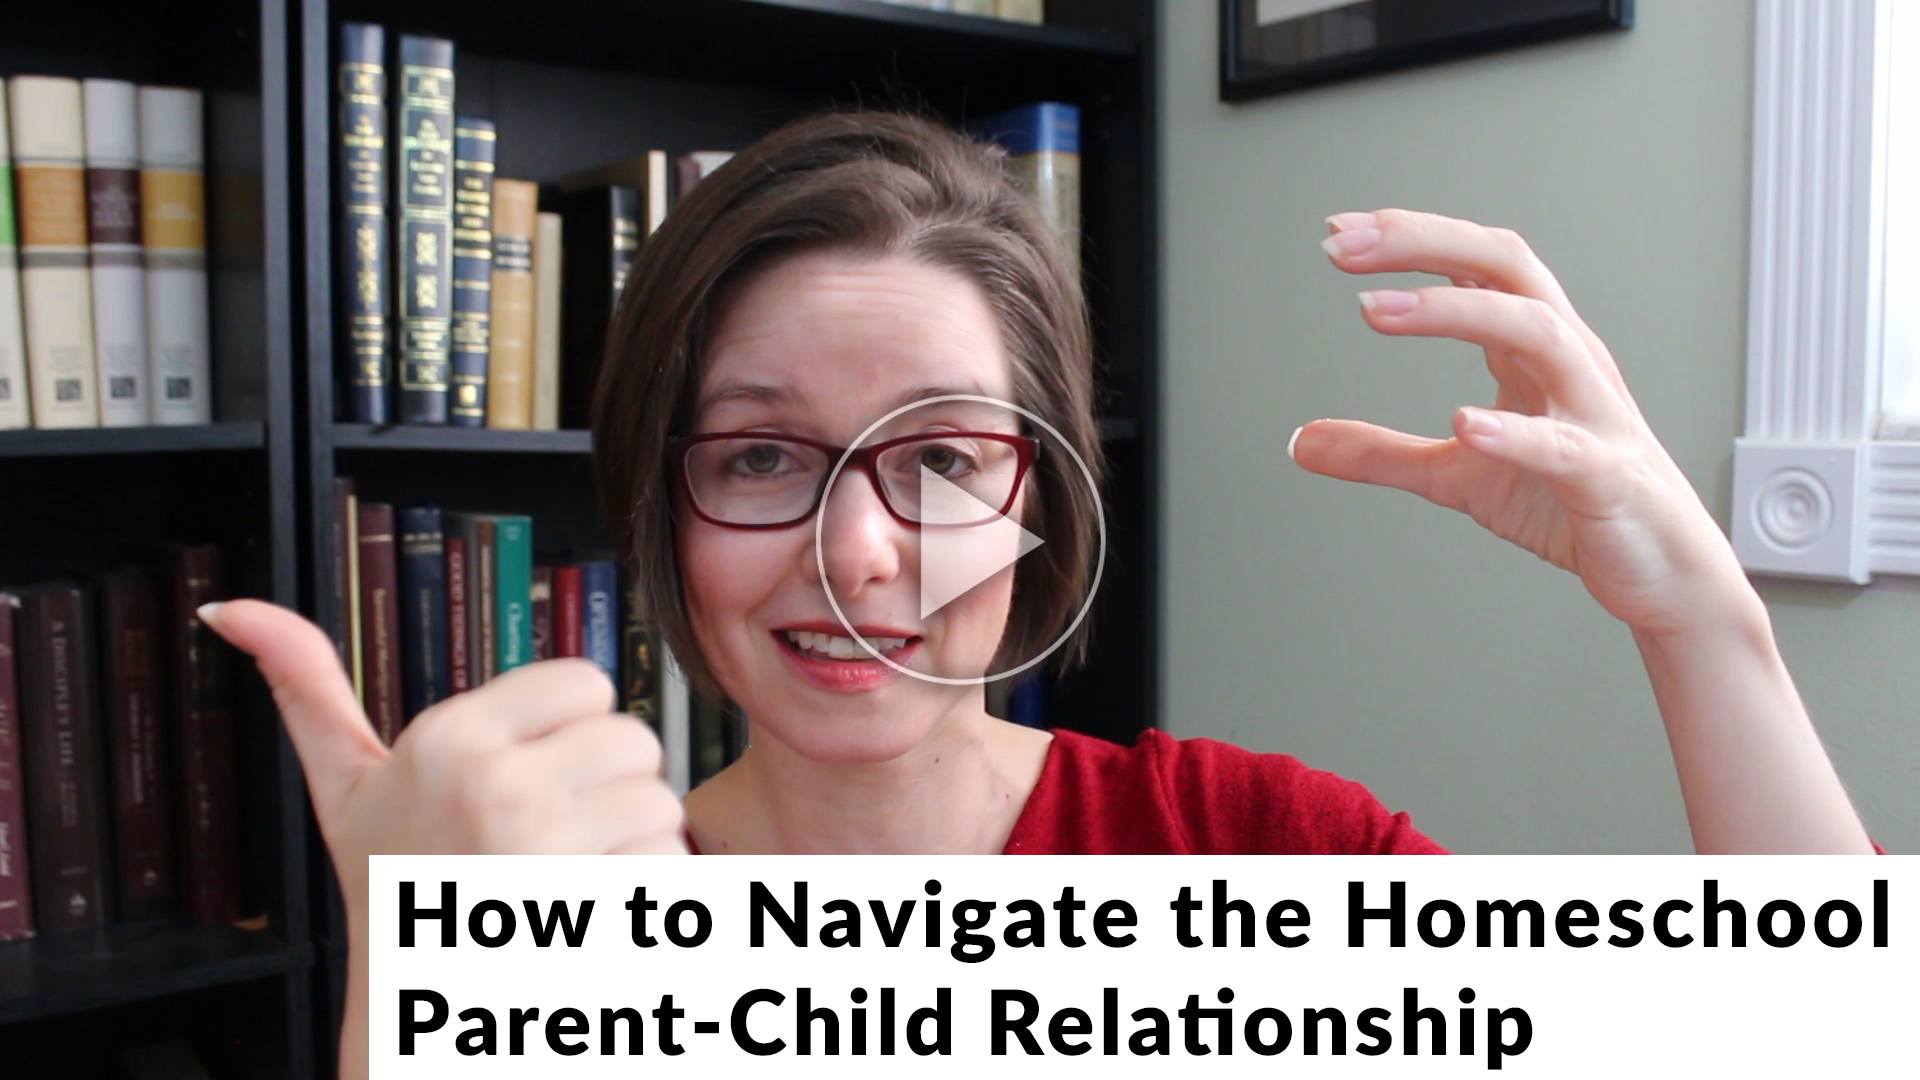 The most important thing I was going to have to learn about was how my homeschool parent-child relationship was going to work. | Homeschool Relationships | Homeschool Expectations | Homeschool parent-child relationships | How to be a good homeschool mom | Homeschooling effects on Family | Stress from parents expectations |